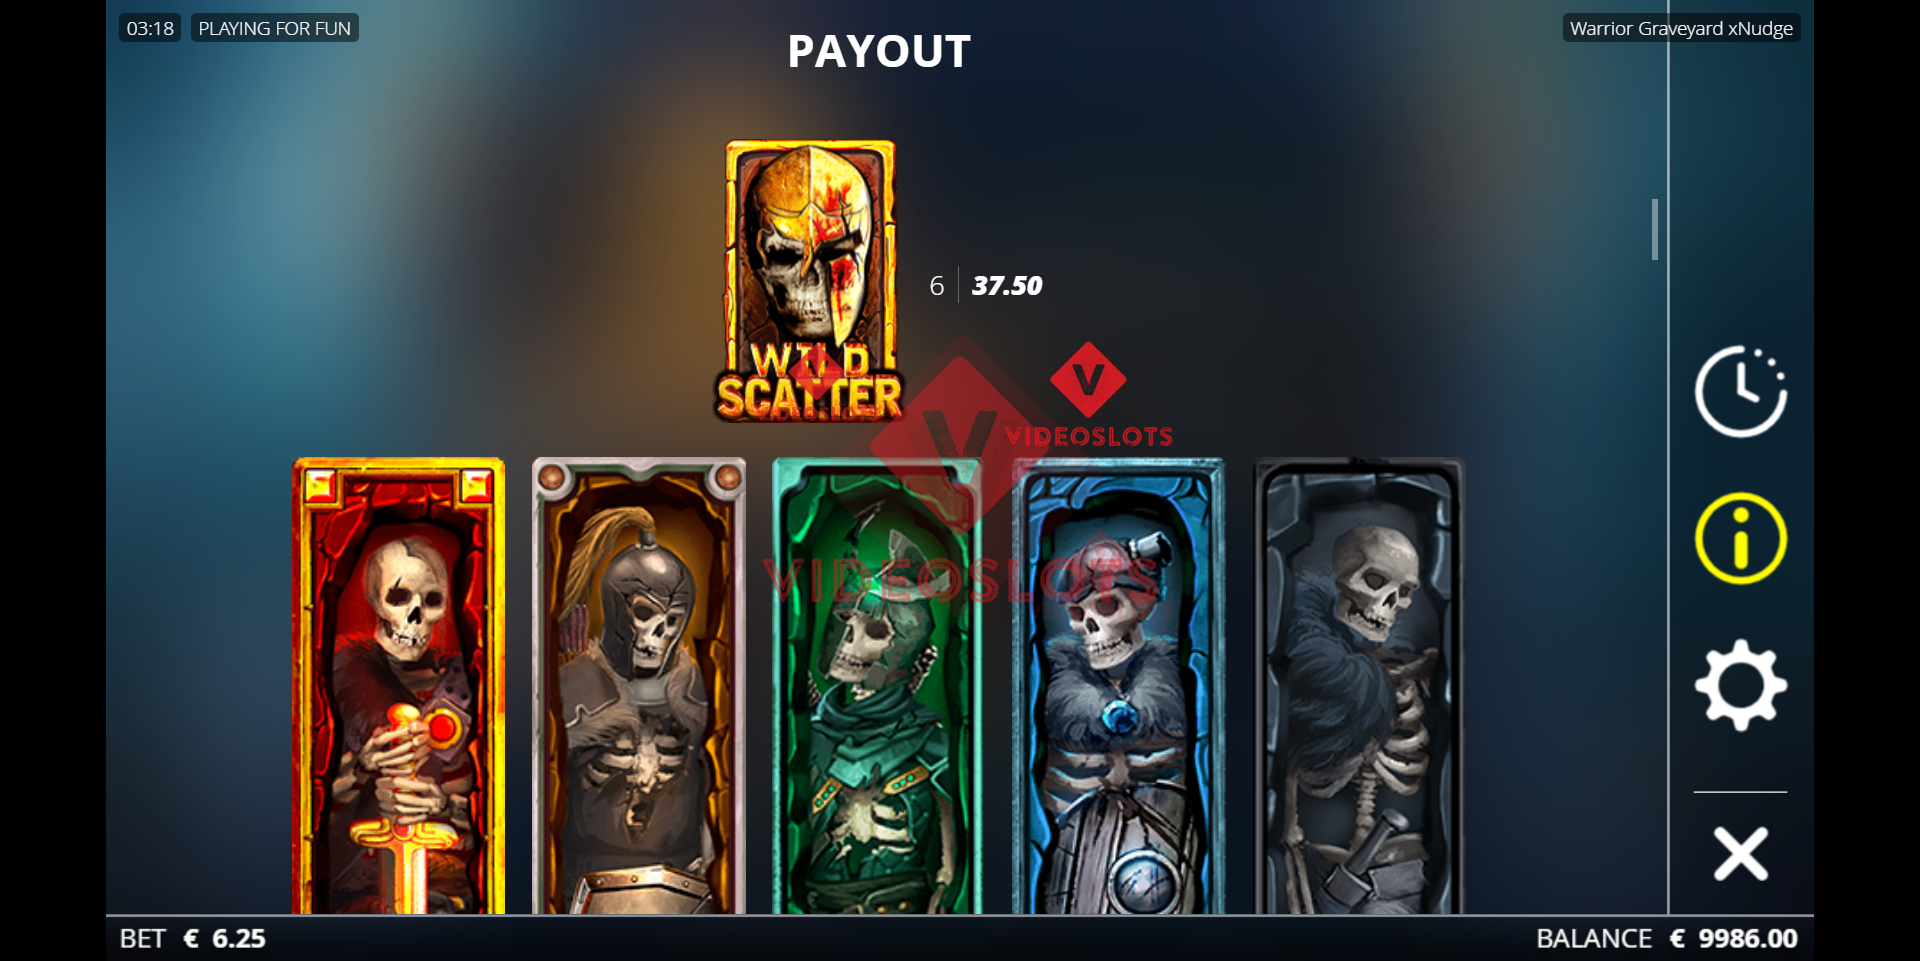 Pay Table for Warrior Graveyard xNudge slot from NoLimit City